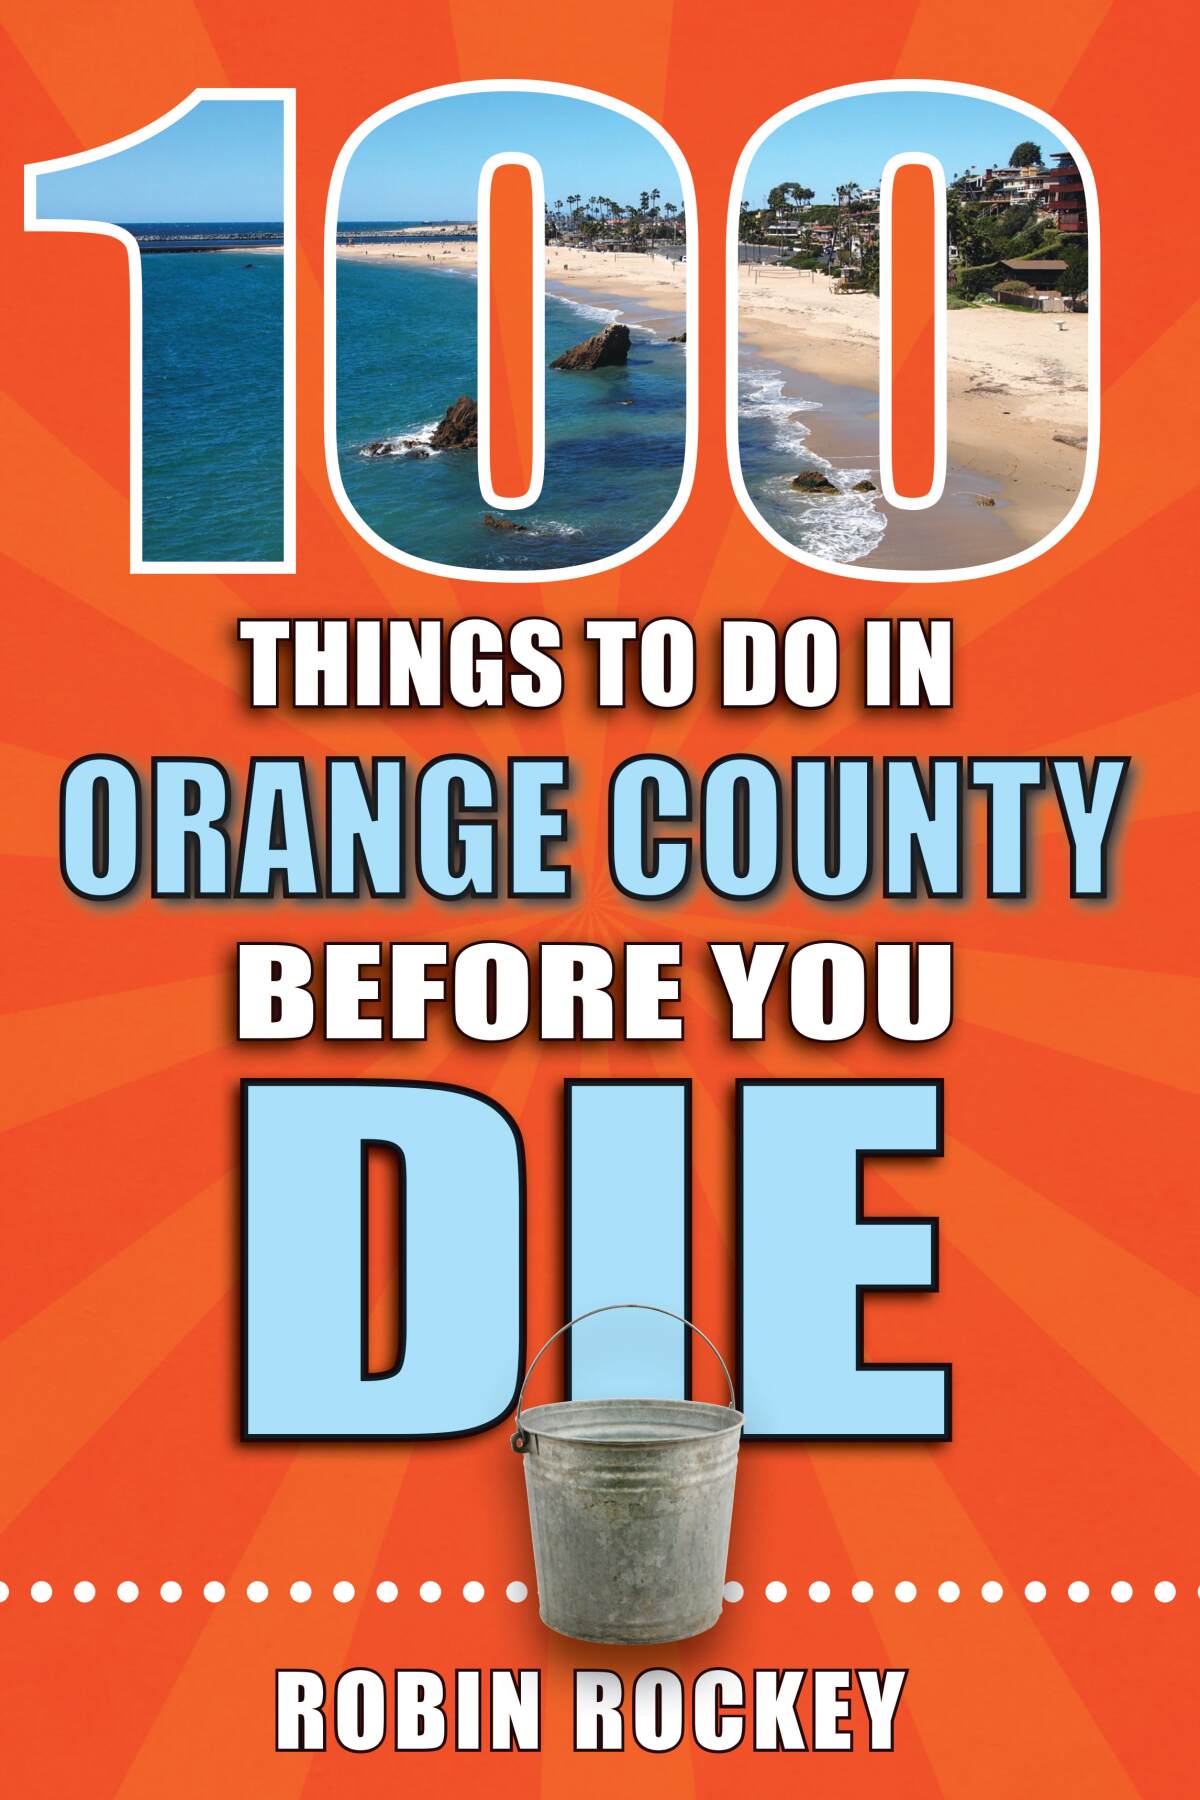 Robin Rockey's “100 Things to Do in Orange County Before You Die" is a guidebook 12 years in the making.